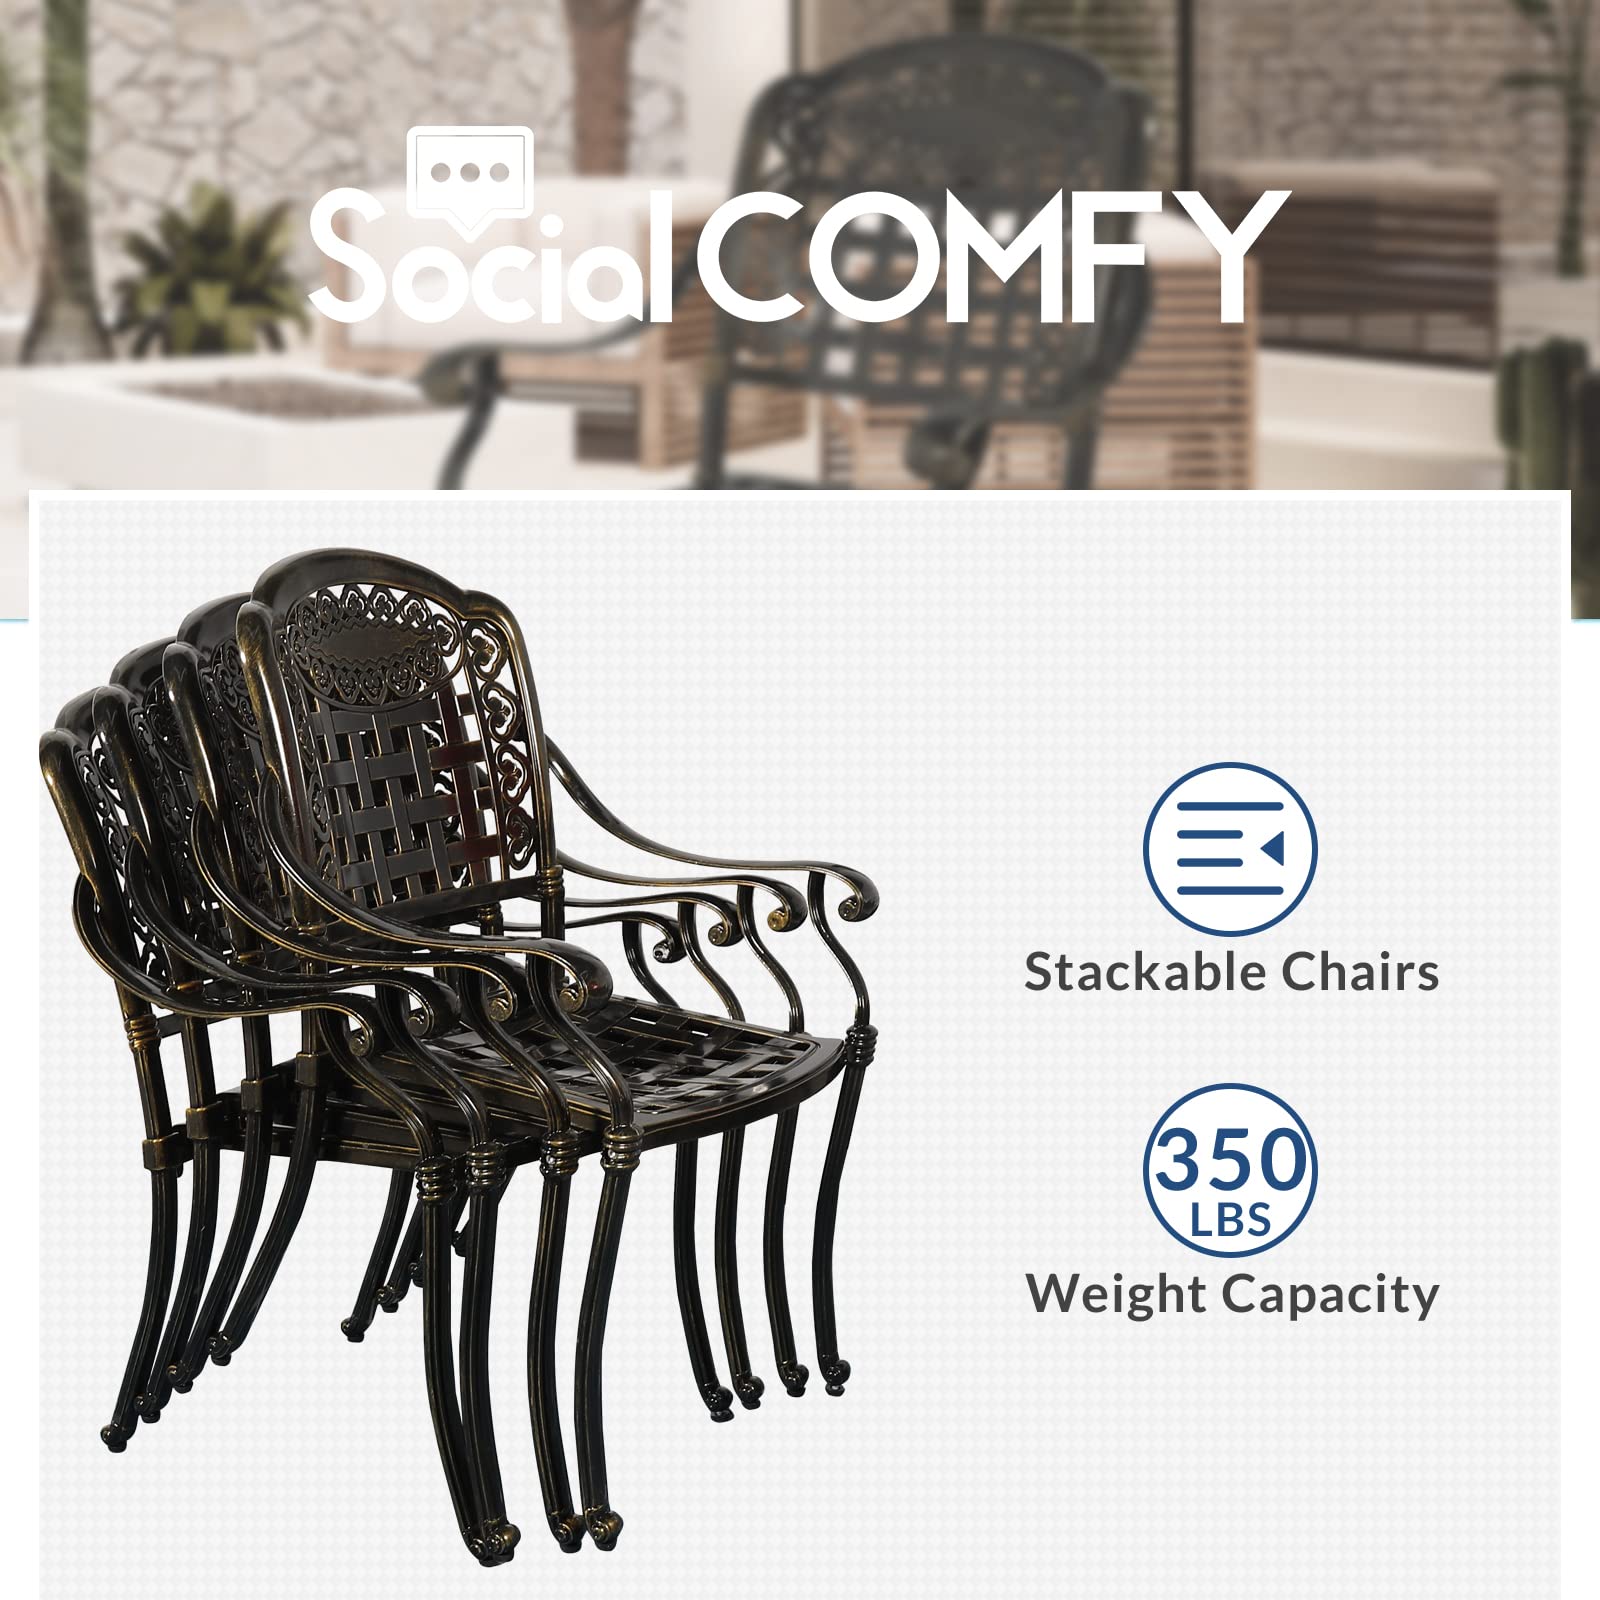 SOCIALCOMFY 3-Piece Outdoor Patio Dining Set, All-Weather Cast Aluminum Furniture Conversation Set, Include 2 Chairs and a 31 inch Round Table with Umbrella Hole for Balcony Lawn Garden Backyard - image 4 of 7